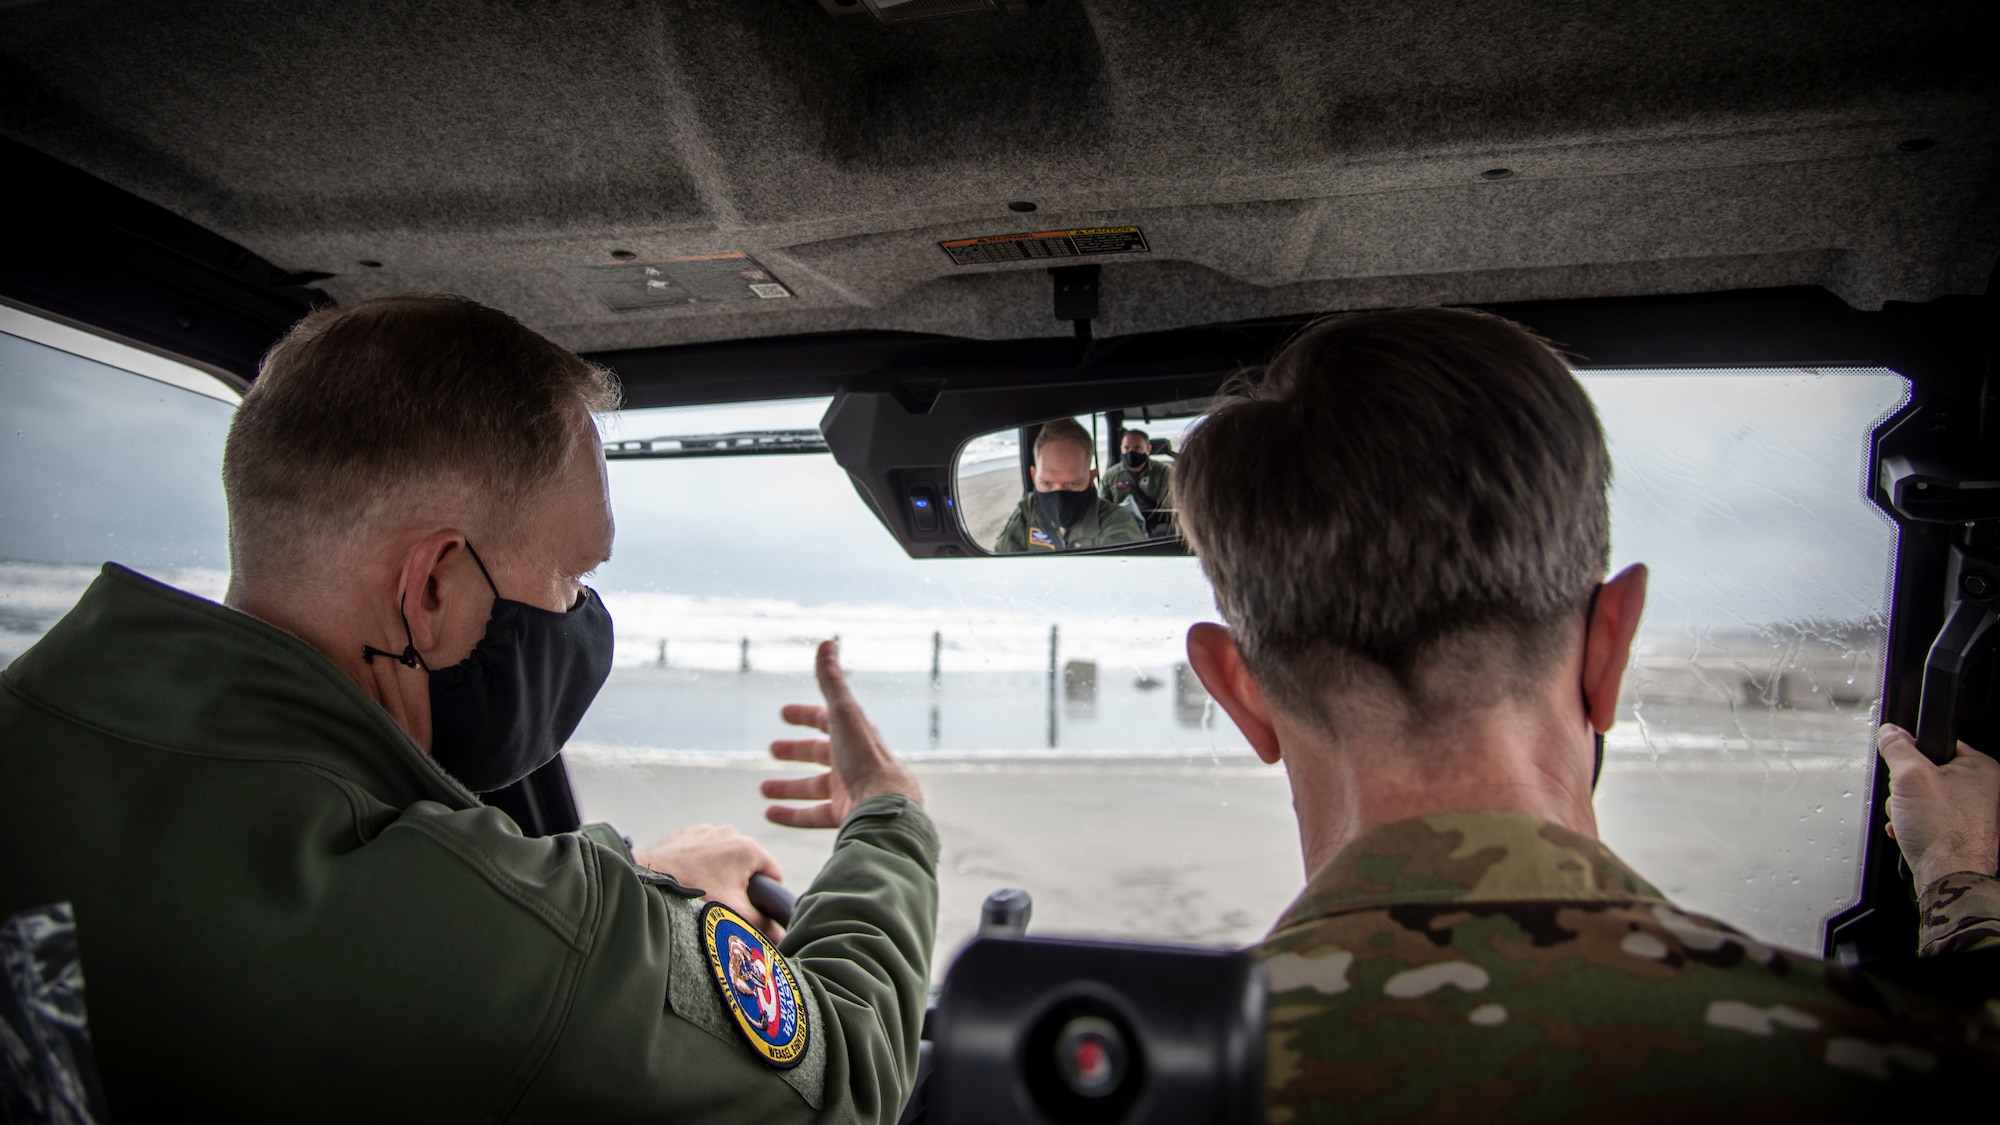 U.S. Air Force Col. Kristopher W. Struve, left, the 35th Fighter Wing commander, showcases Draughon Range to Lt. Gen. Kevin B. Schneider, right, the U.S. Forces Japan and Fifth Air Force commander, at Draughon Range near Misawa Air Base, Japan, May 20, 2020. Draughon range is the premier training site where Misawa’s F-16 Fighting Falcons employ inert munitions and defend against simulated surface-to-air threats. The range is also utilized by many other USFJ units, providing critical training to combat search and rescue, mobility and fighter units throughout Japan. (U.S. Air Force photo by Airman 1st Class China M. Shock)